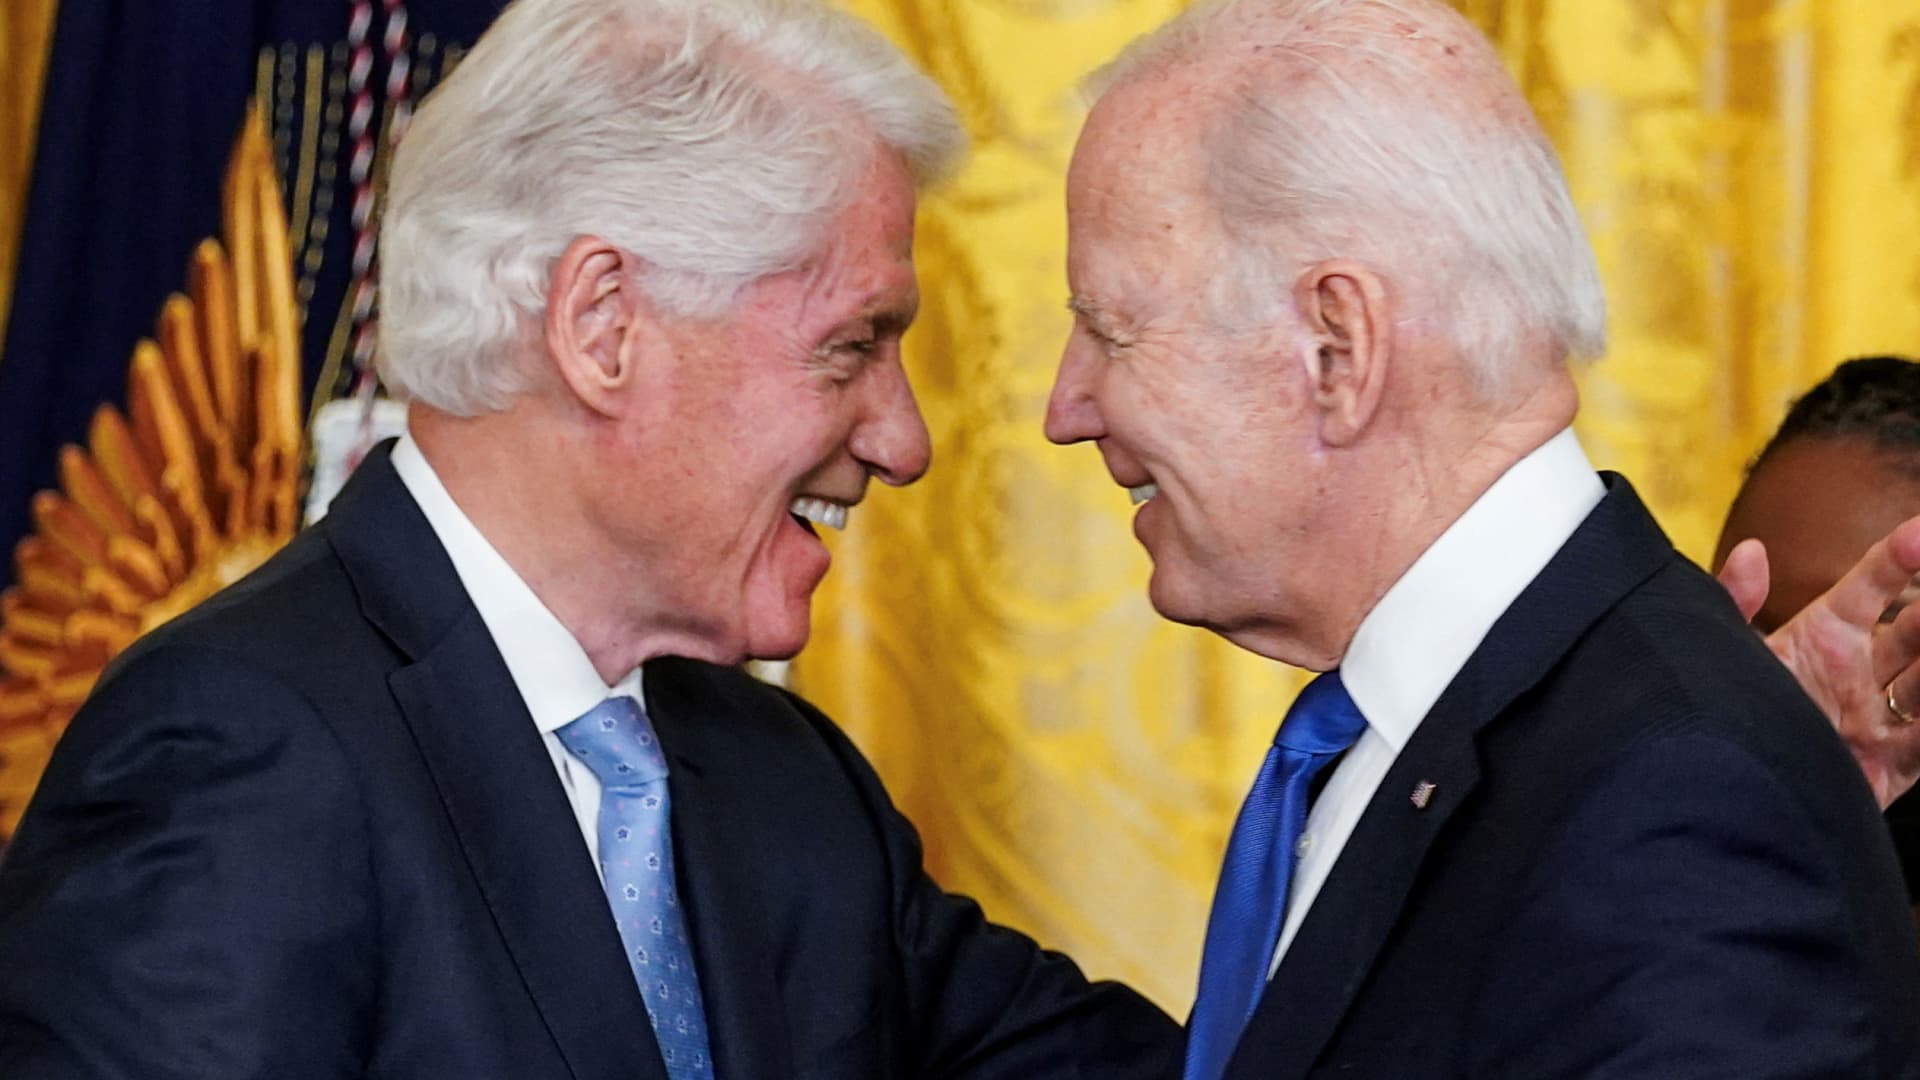 Former U.S. President Bill Clinton greets U.S. President Joe Biden during an event to mark the 30th anniversary (Feb. 5, 1993) of the Family and Medical Leave Act, in the East Room at the White House in Washington, February 2, 2023.